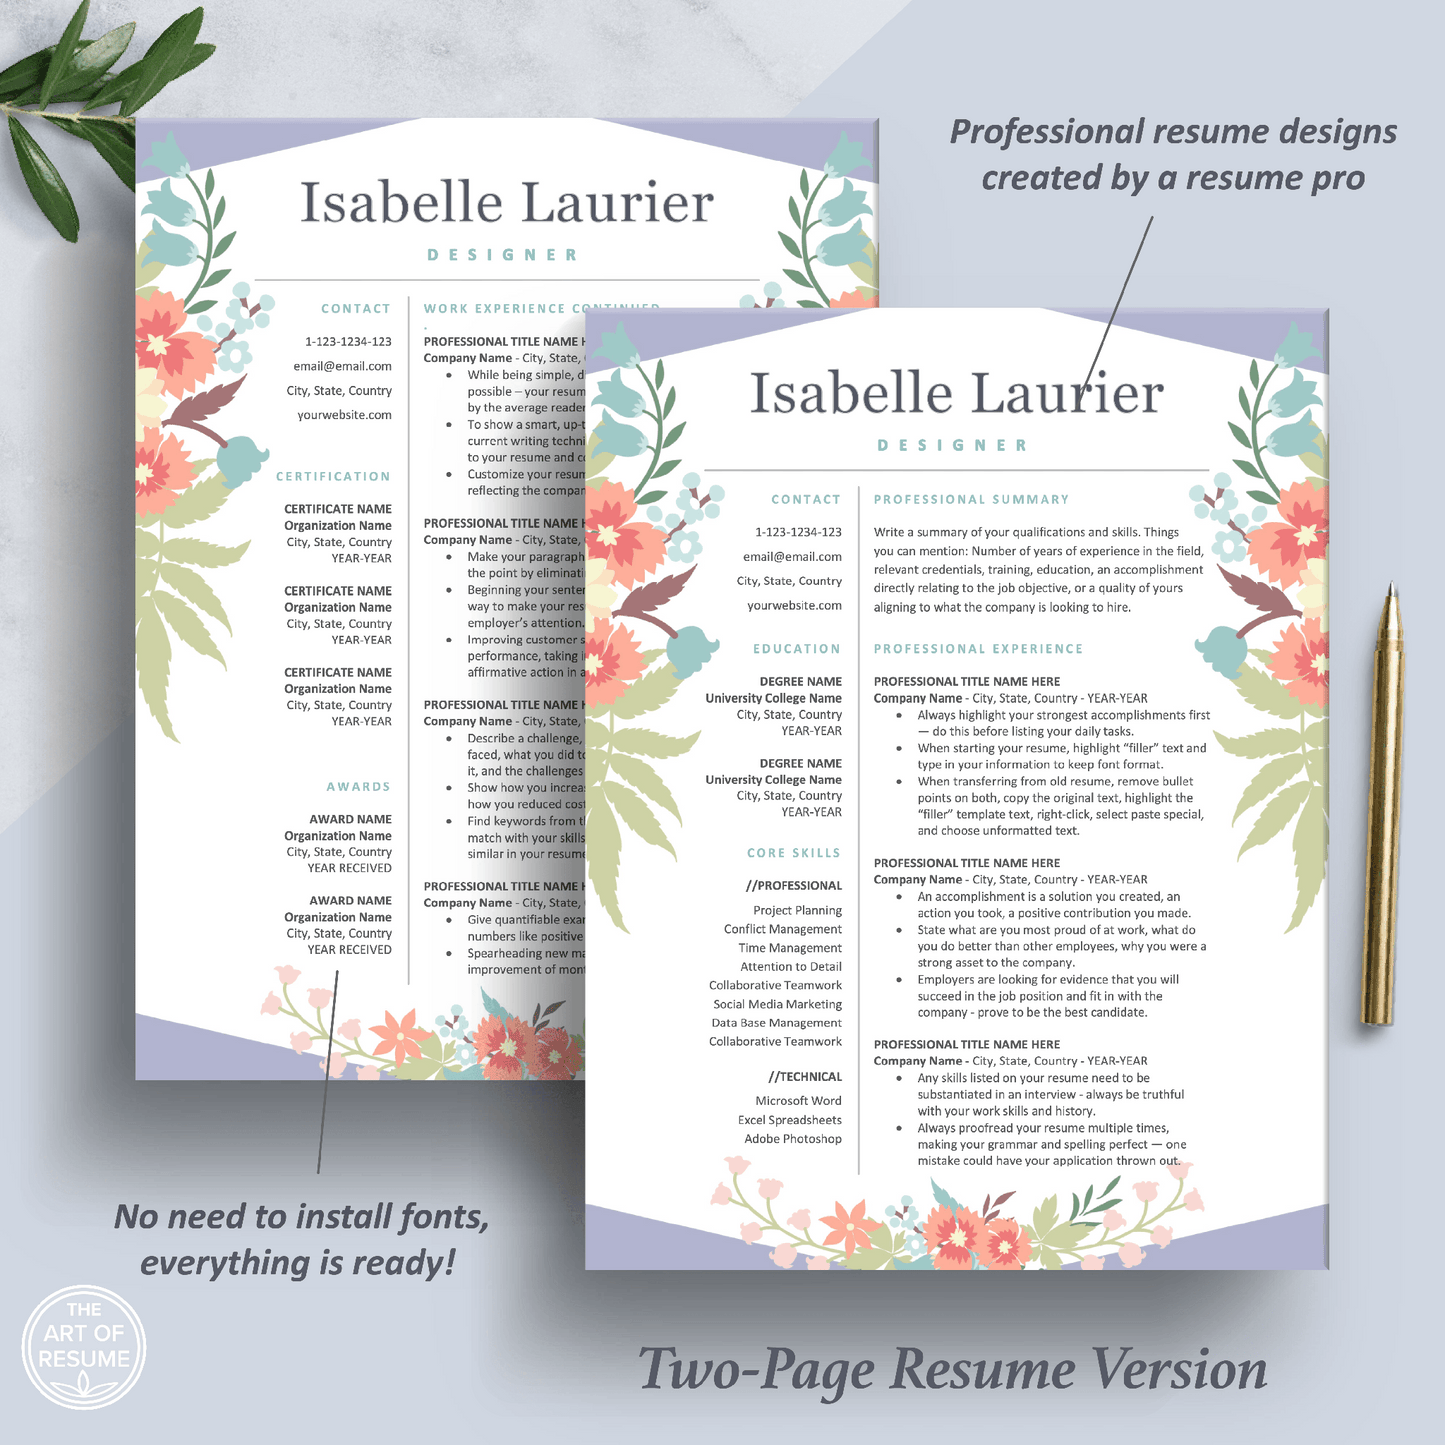 Creative Resume Design with Free Resume Writing Guide | Blogger, Stylist, Design, Teacher - The Art of Resume